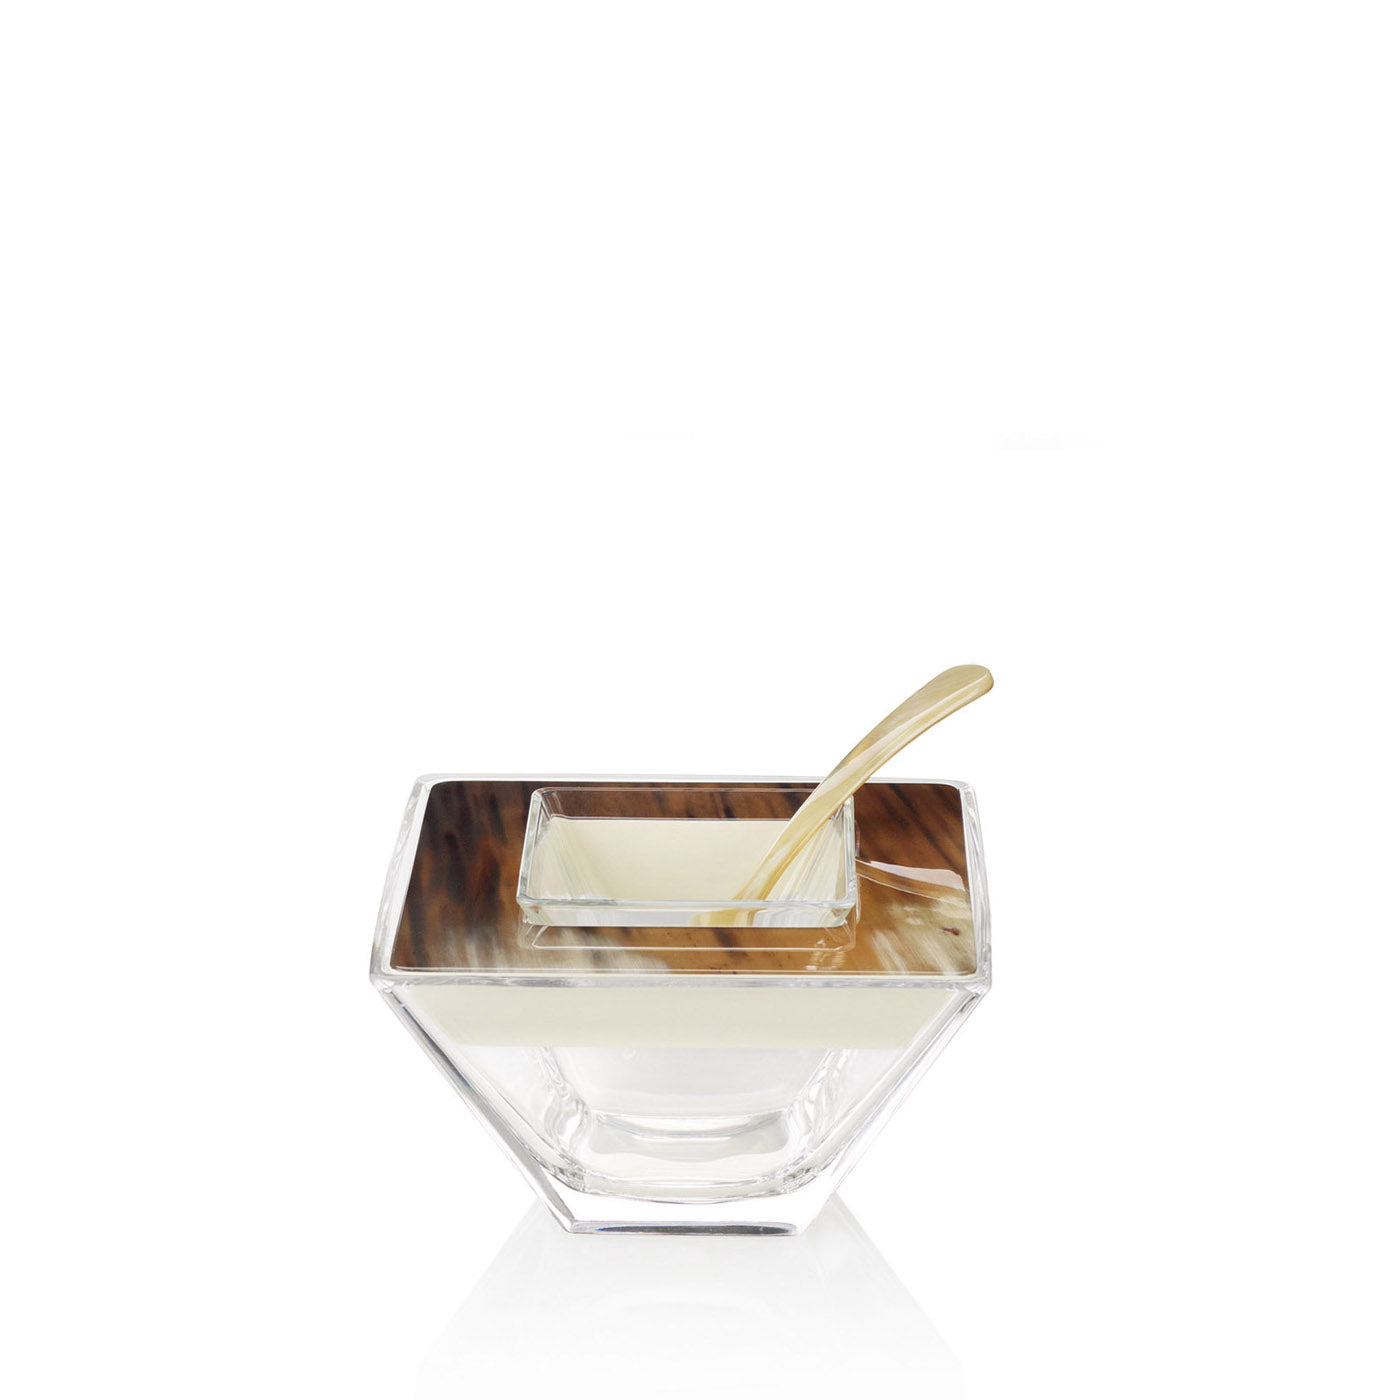 Sterlet Caviar Bowl by Arcahorn | Crafted from horn, wood with lacquered ivory gloss finish, and Venetian glass. Includes a caviar spoon in horn. | Tableware and Serveware | 2Jour Concierge, your luxury lifestyle shop